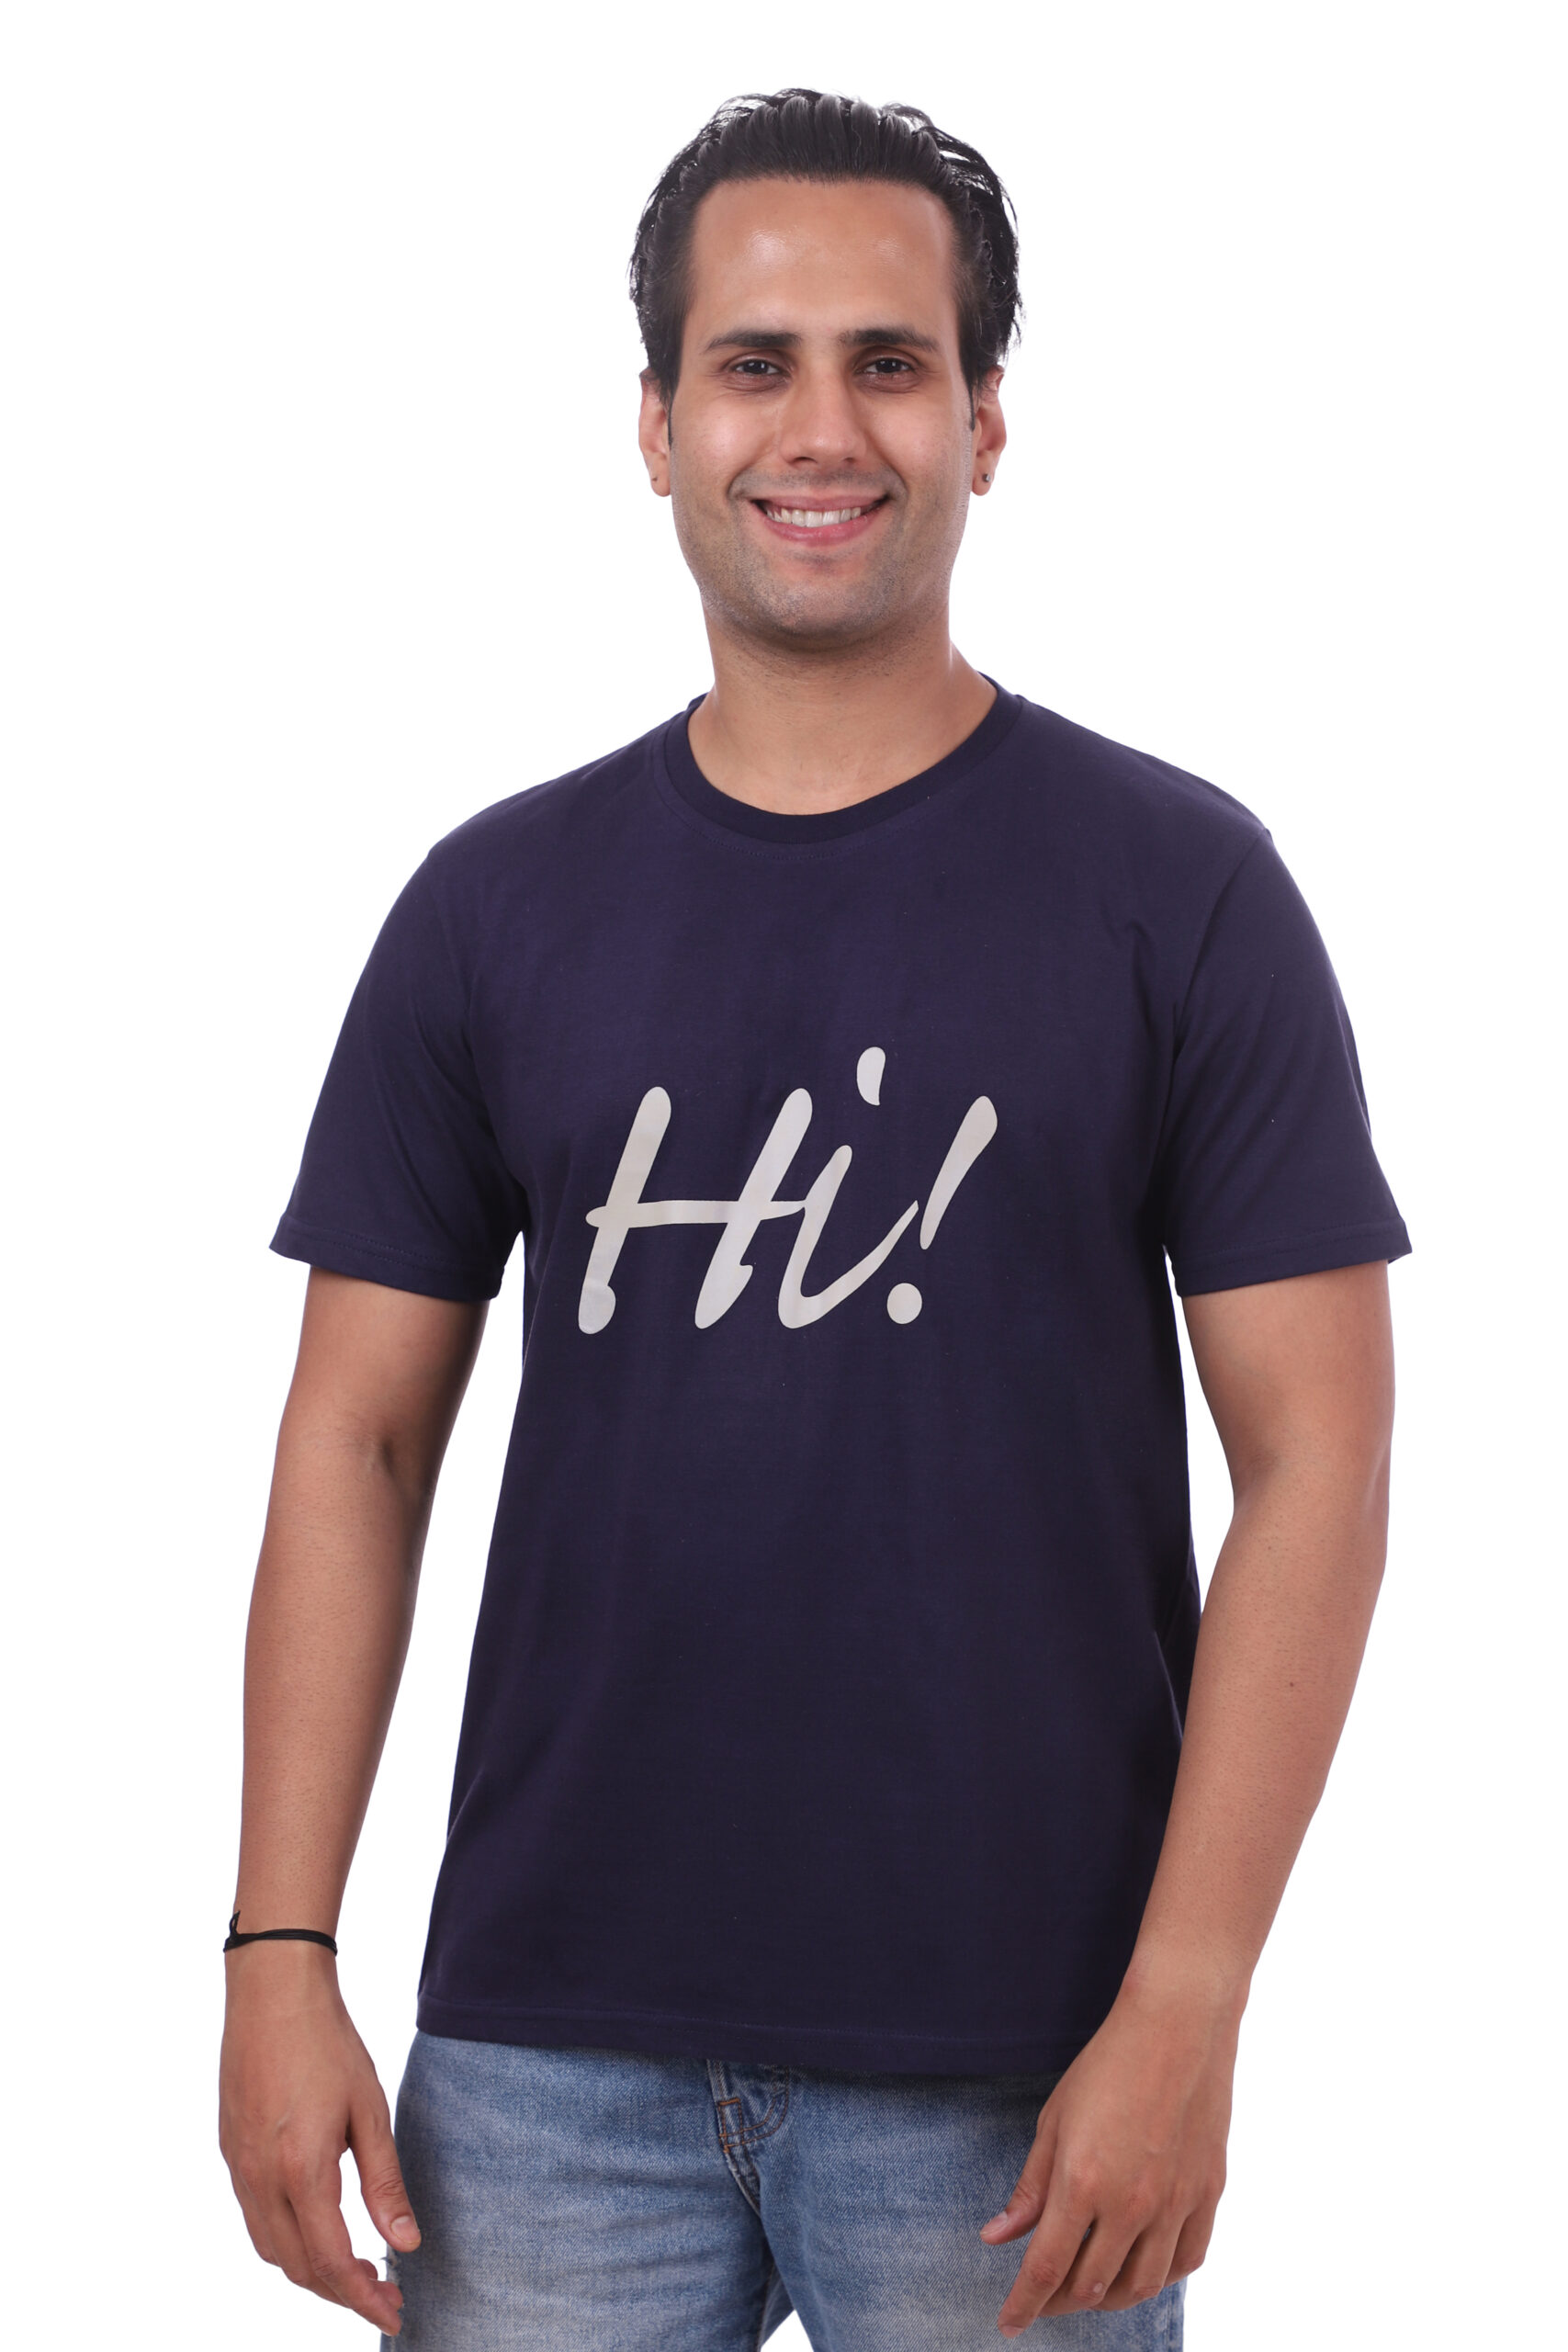 Graphics Quoted T-shirt With IIT Kanpur Logo - AlwaysIITian